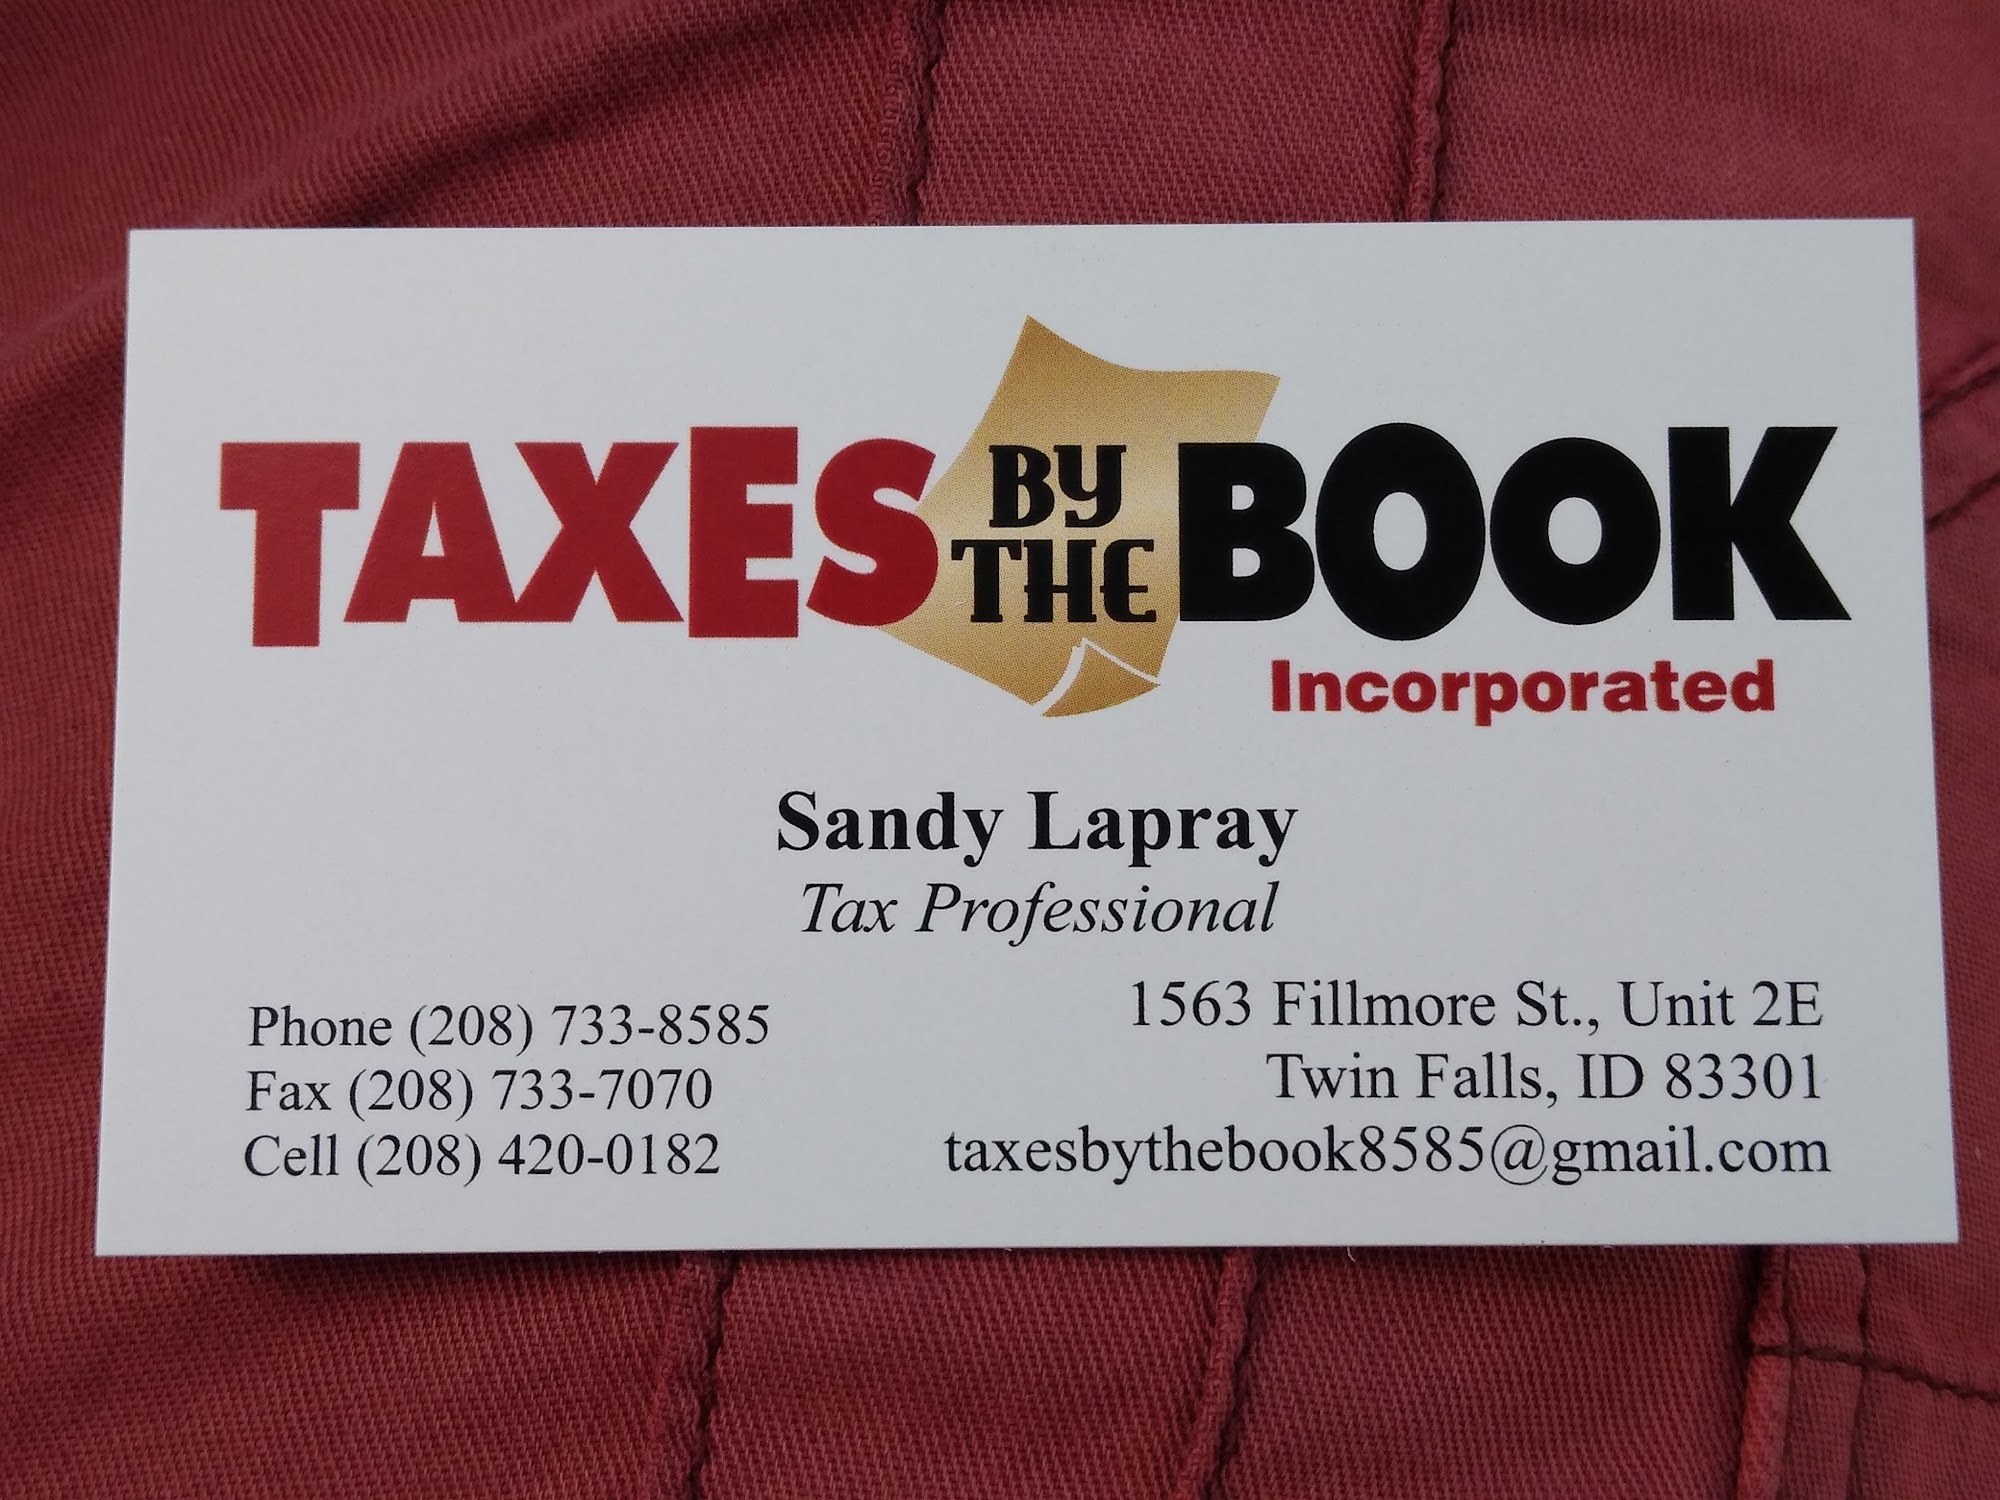 Taxes By The Book Incorporated